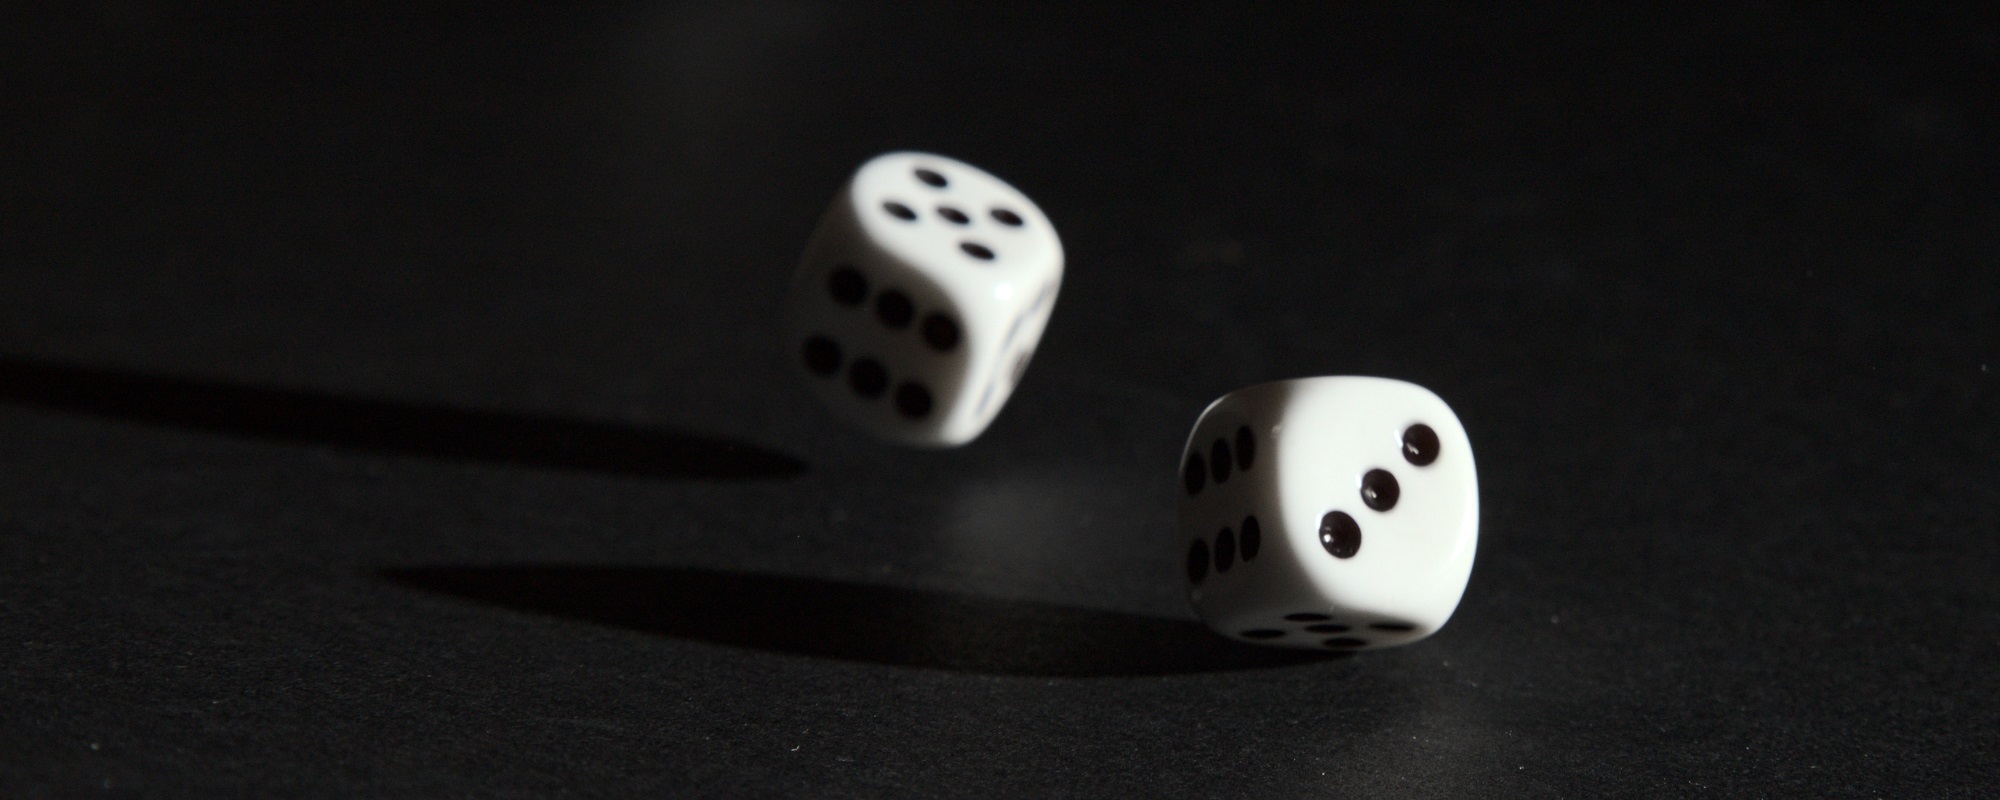 Two die mid-roll are positioned against a black background